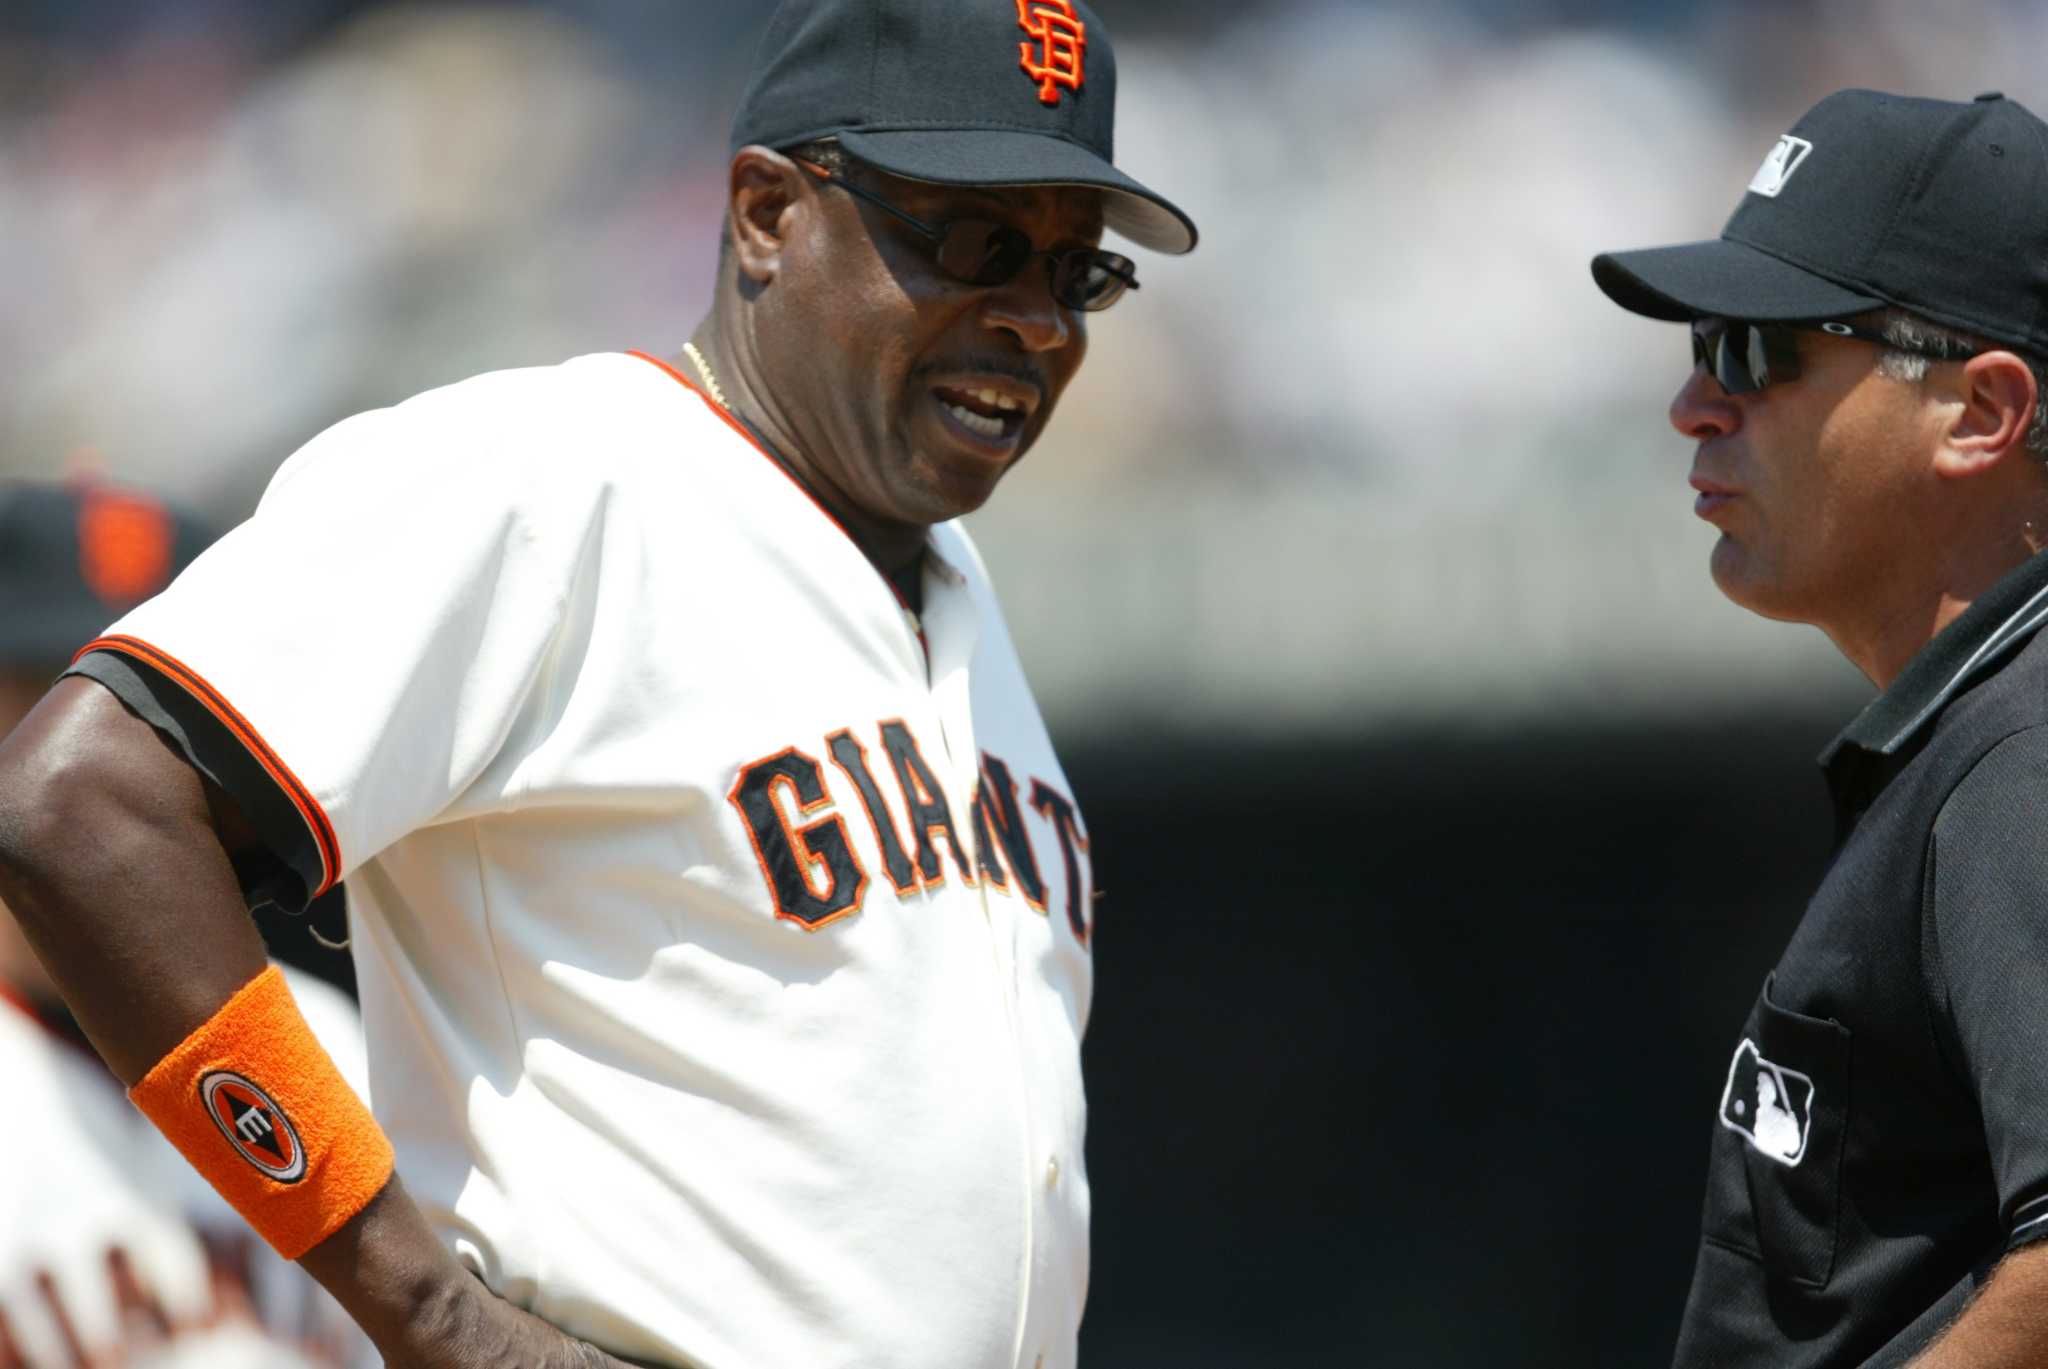 Dusty Baker's Career From Childhood to Astros' Manager